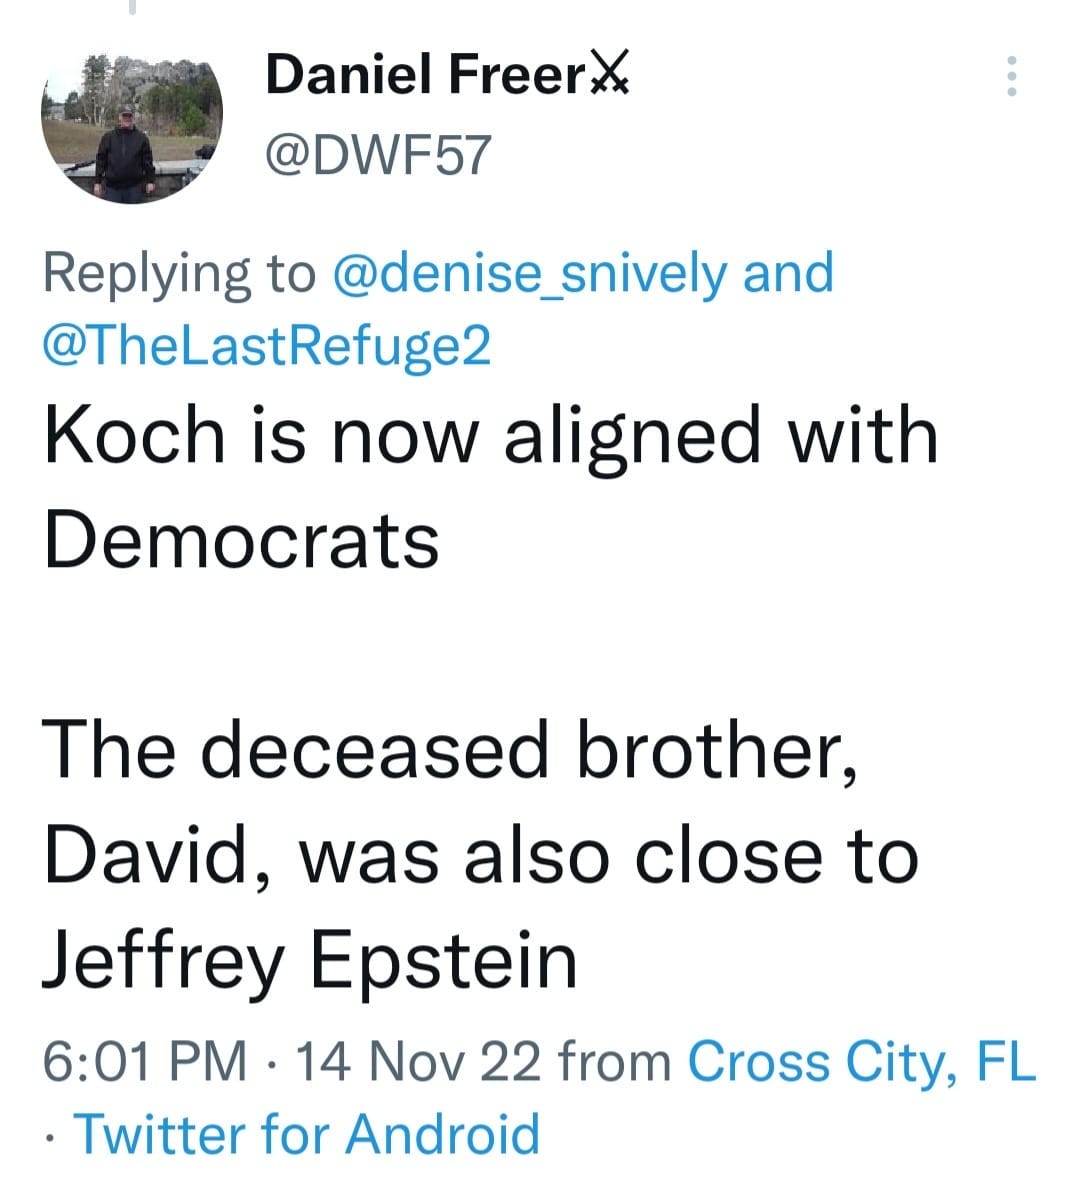 May be a Twitter screenshot of 1 person and text that says 'Daniel Freer @DWF57 Replying to @denise_snively and @TheLastRefuge2 Koch is now aligned with Democrats The deceased brother, David, was also close to Jeffrey Epstein 6:01 PM 14 Nov 22 from Cross City, FL .Twitter for Android'